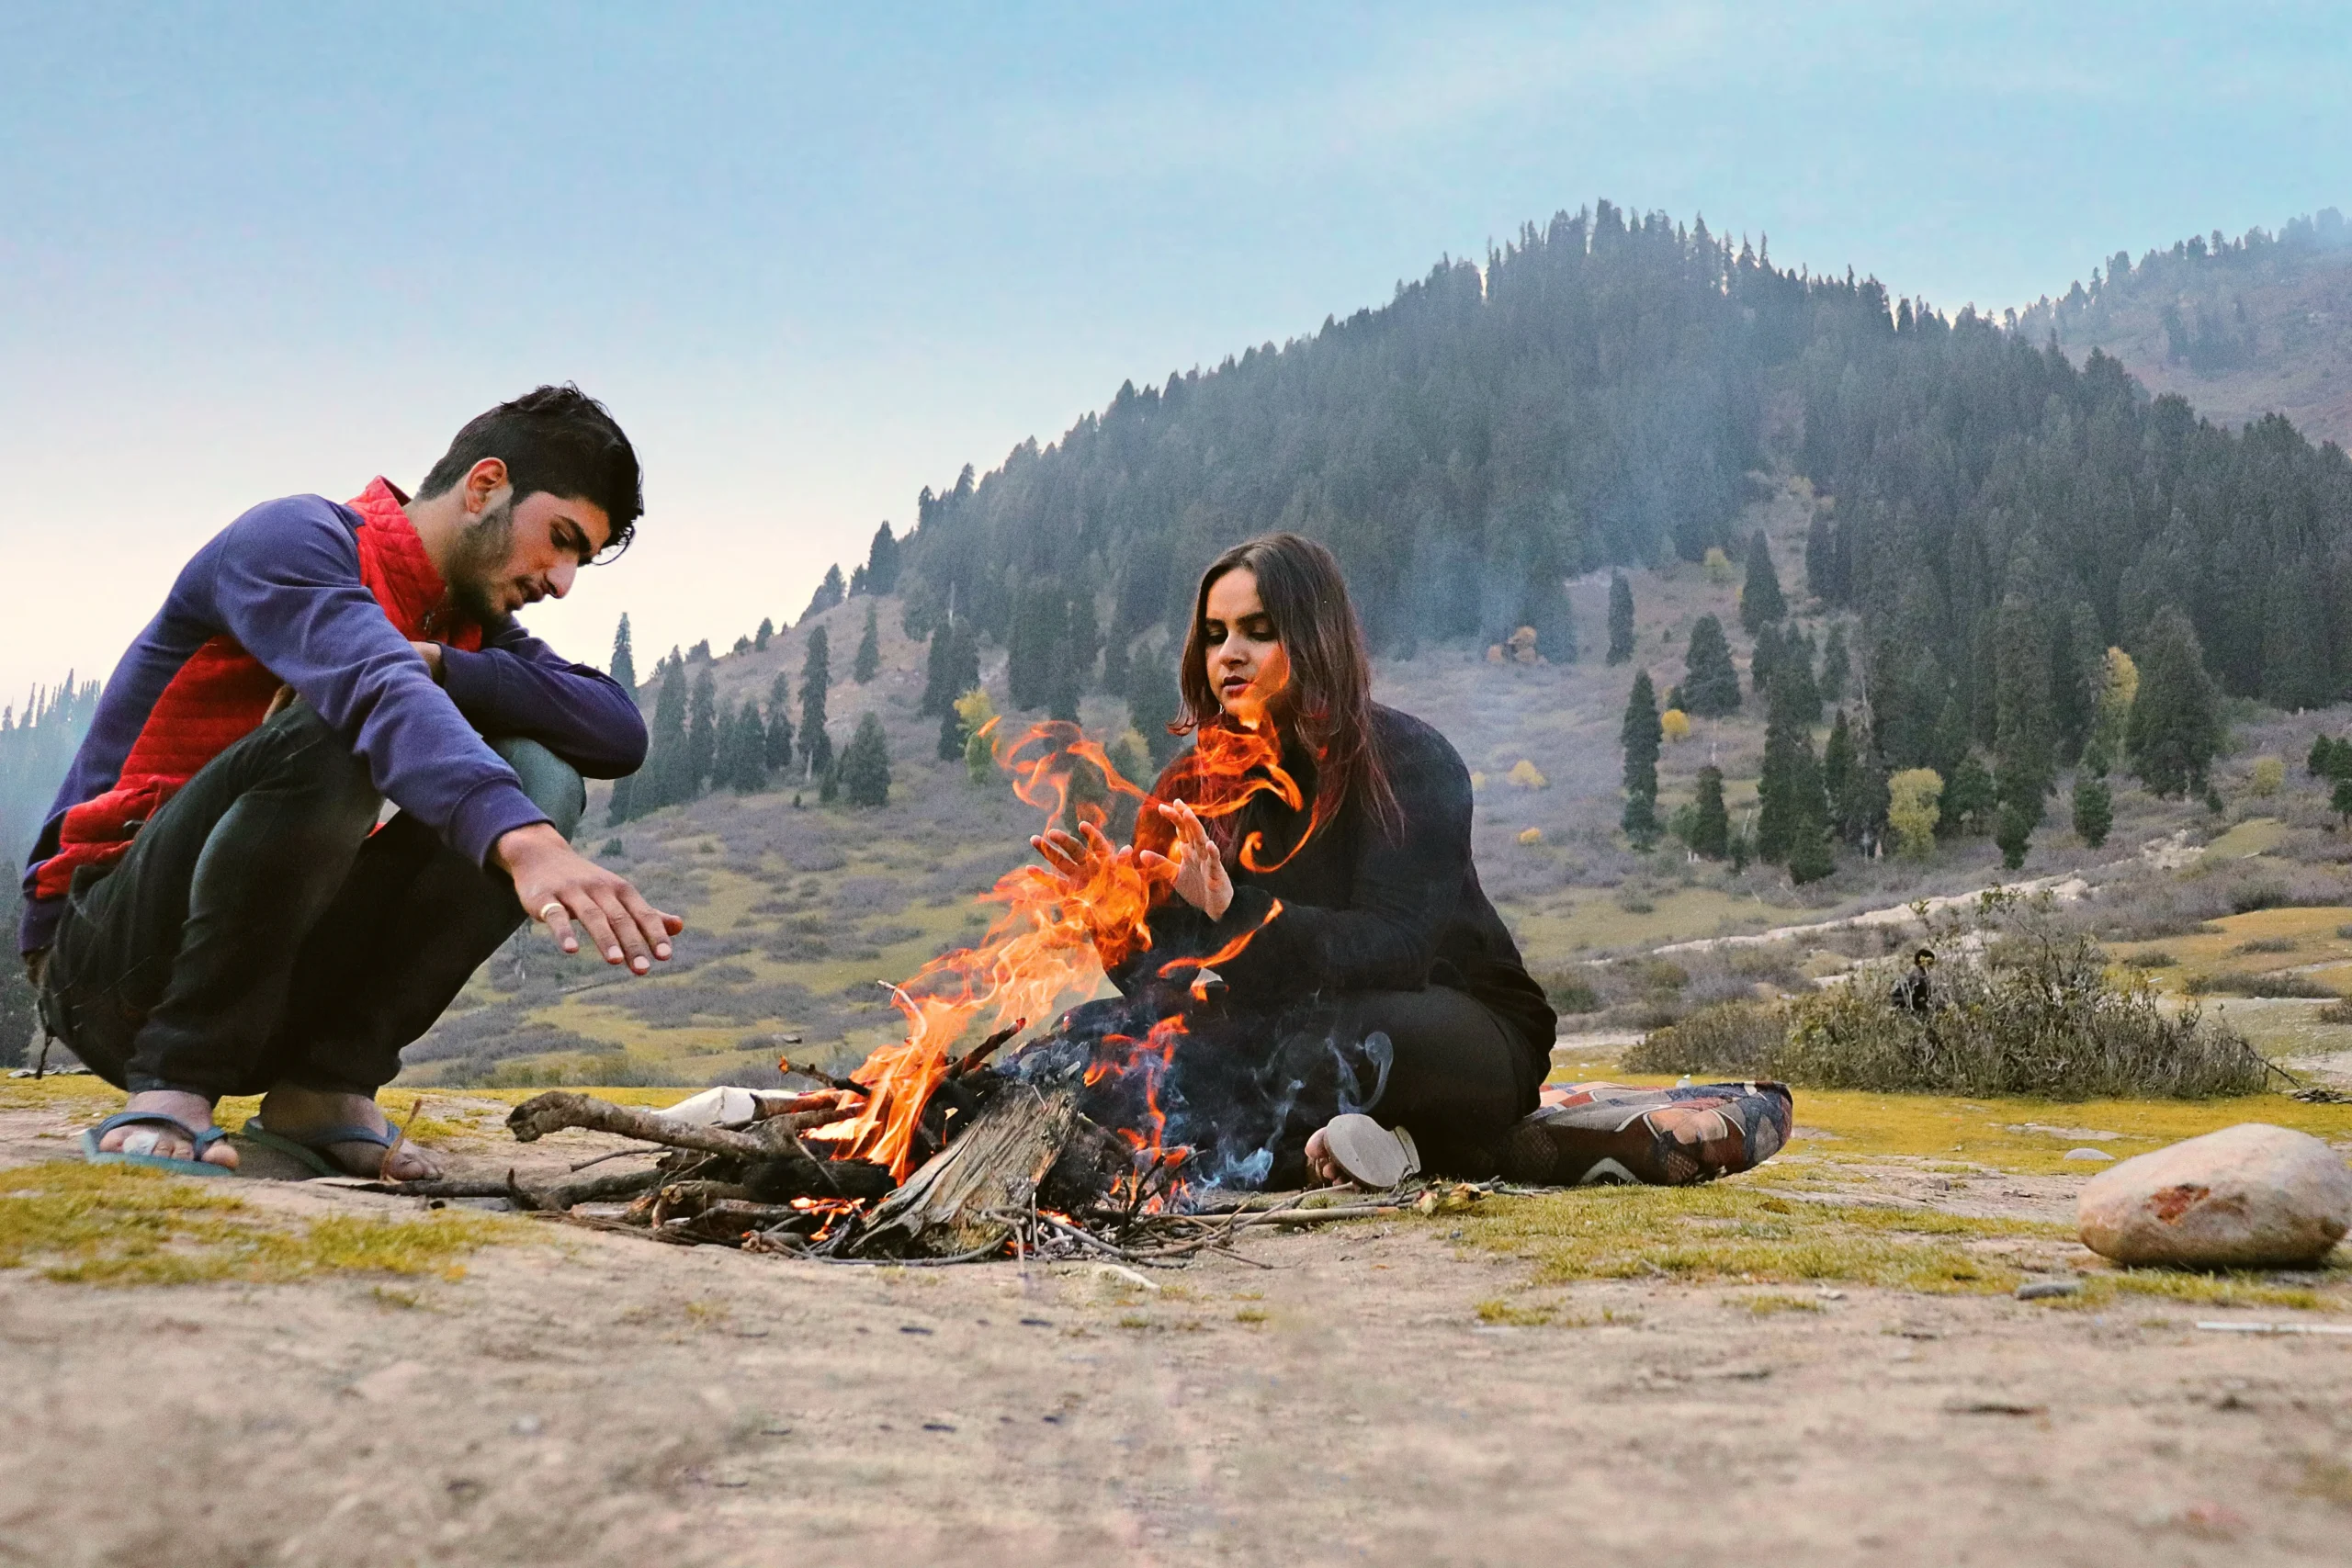 Make your honeymoon unforgettable with Pack to Kashmir's Luxury honeymoon package to Kashmir. Experience the beauty of Kashmir with your loved one in style.